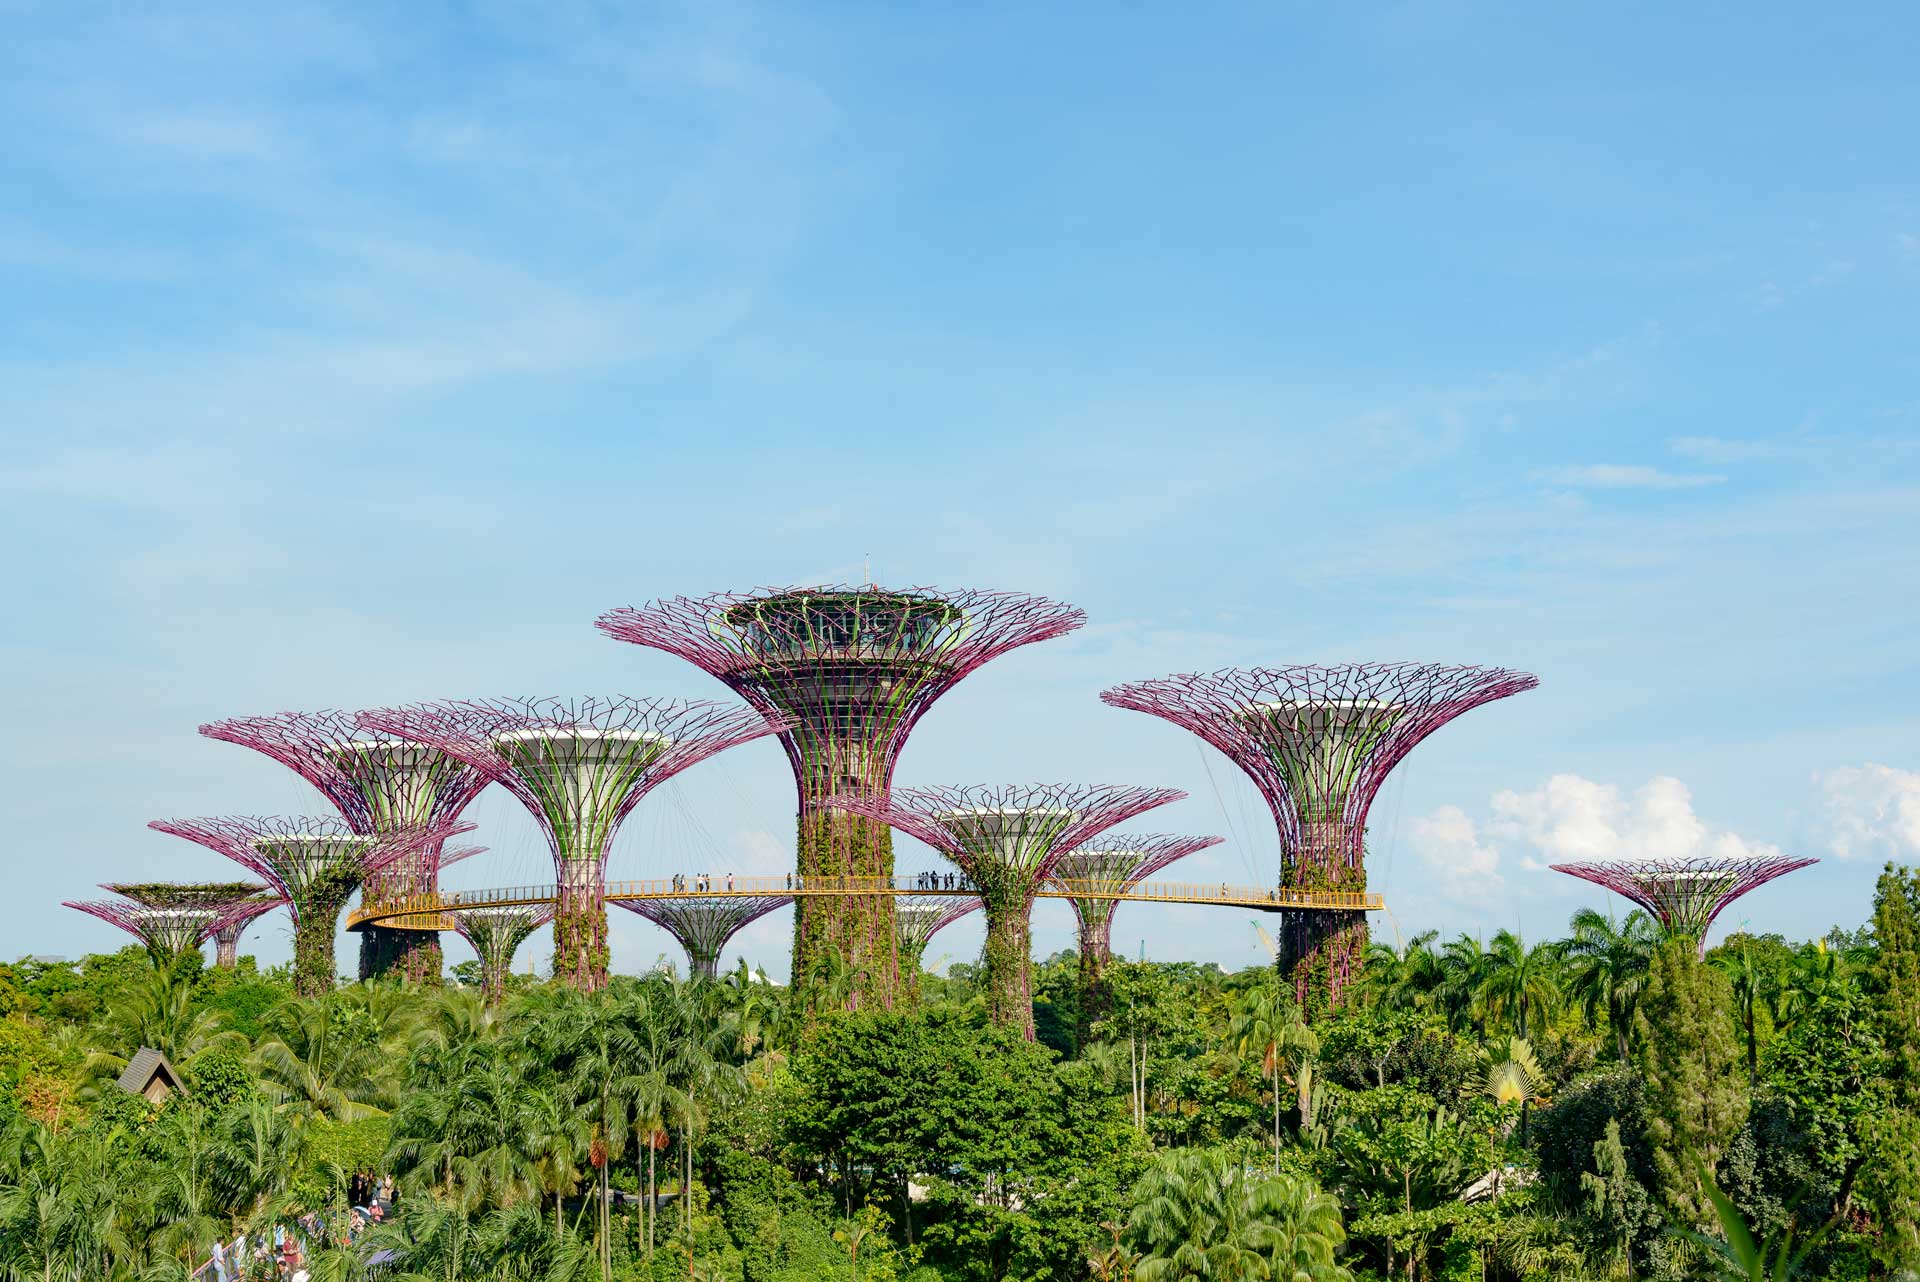 Singapore Supertrees in garden by the bay at Bay South Singapore.